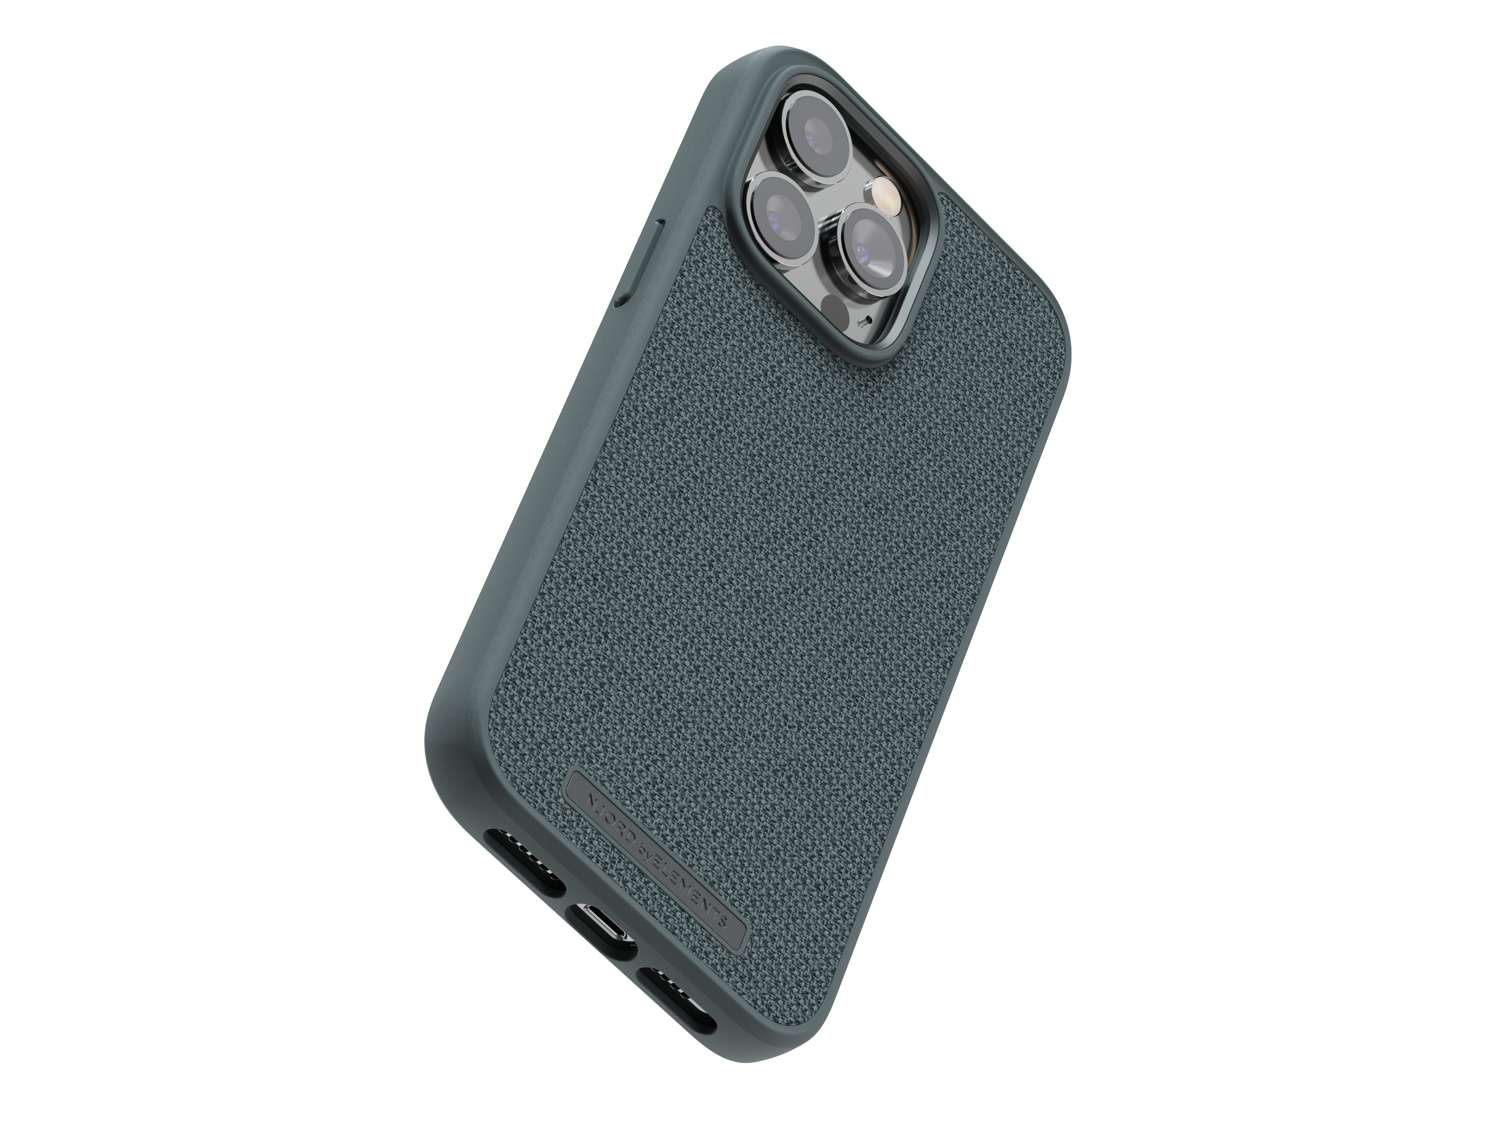 RhinoShield SolidSuit for iPhone 13 series: First Look at Some Outstanding  Cases! 